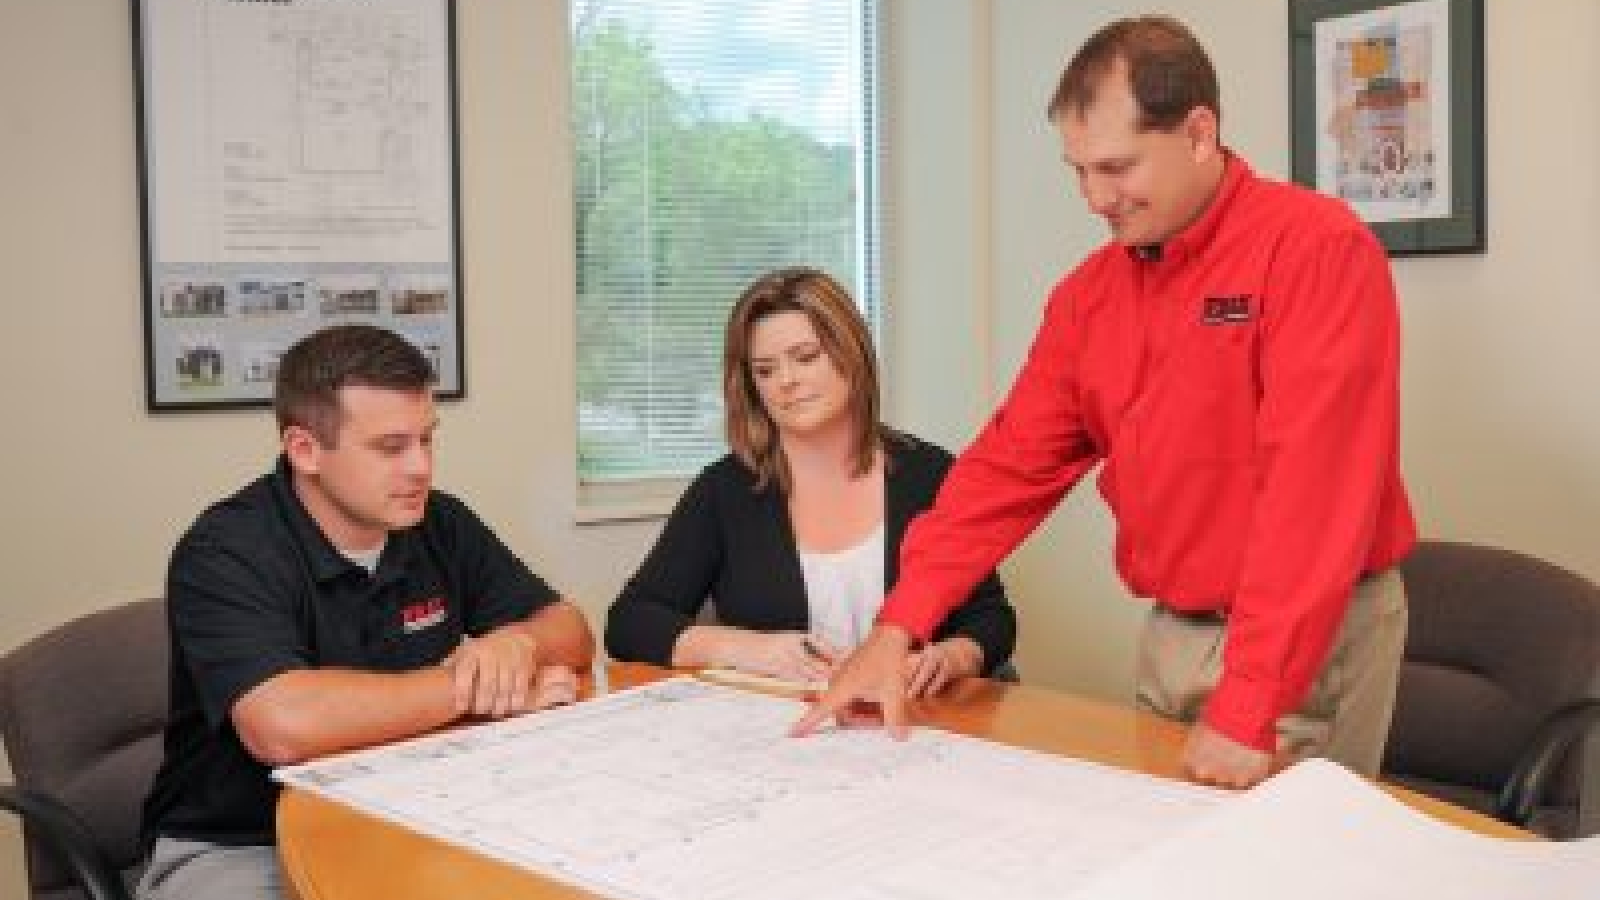 Angie, Brandon and Erich reviewing building plans on a table.